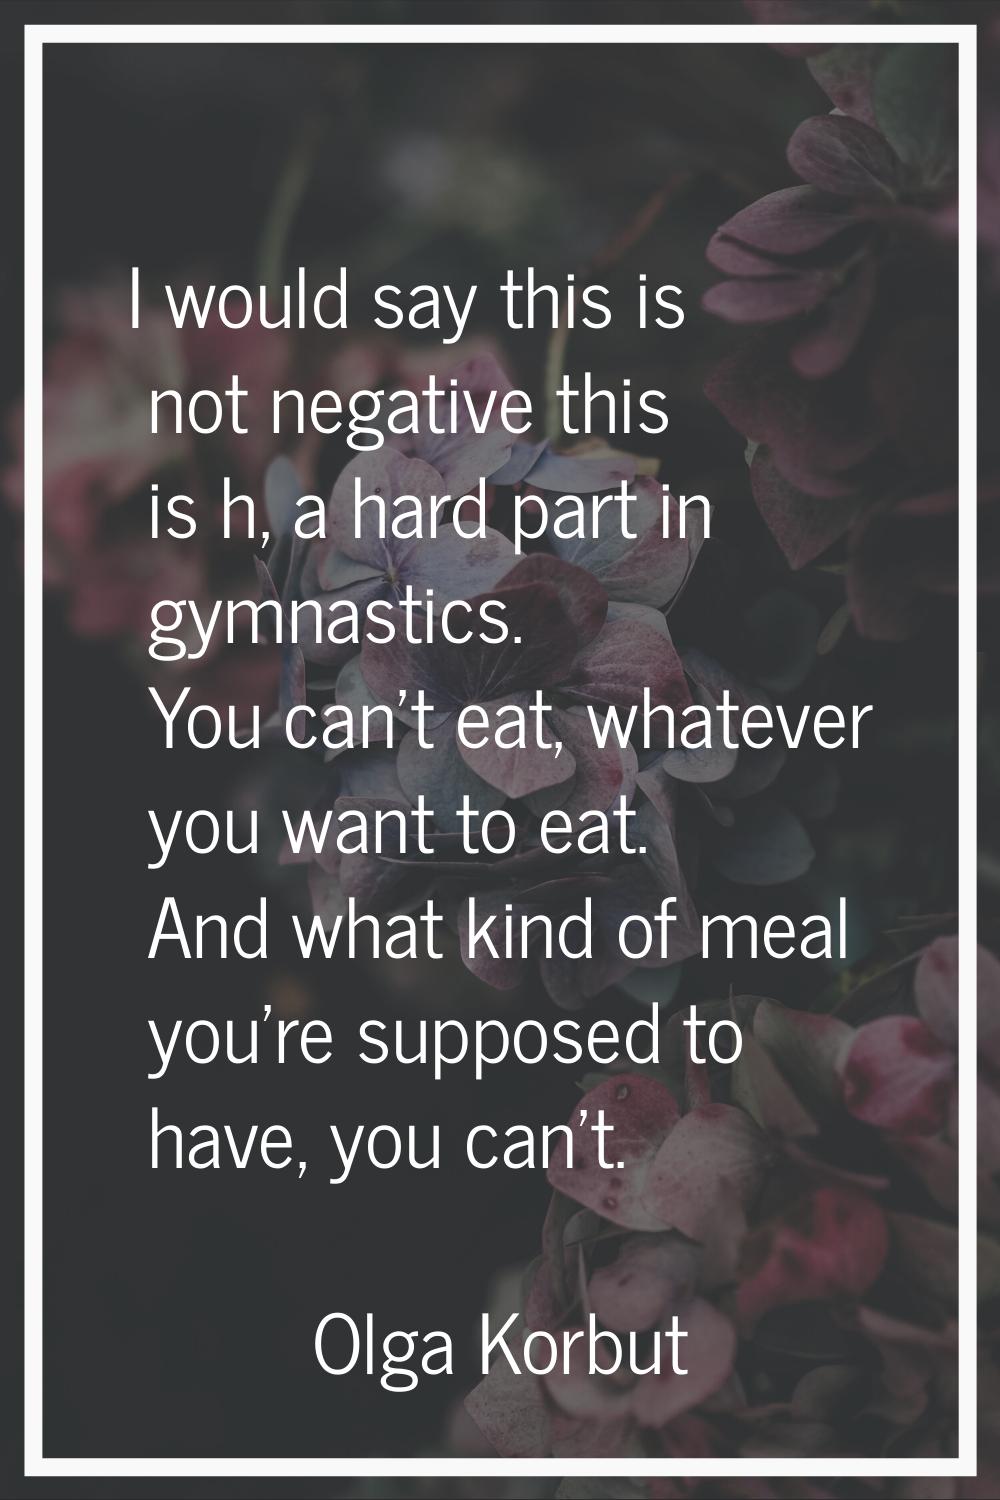 I would say this is not negative this is h, a hard part in gymnastics. You can't eat, whatever you 